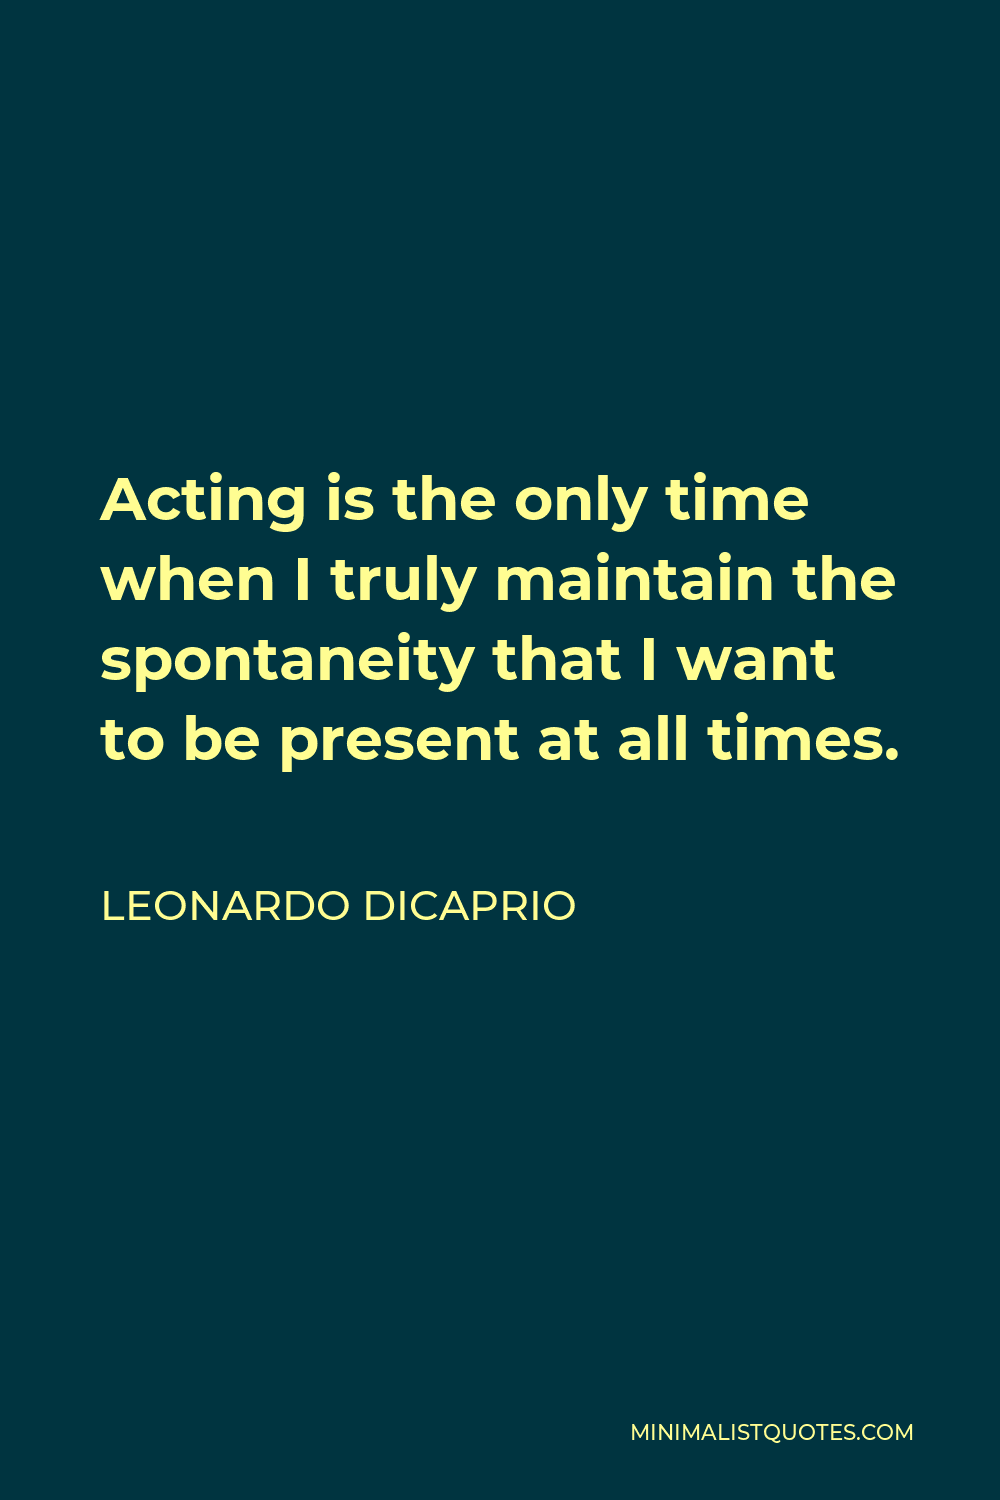 Leonardo DiCaprio Quote - Acting is the only time when I truly maintain the spontaneity that I want to be present at all times.